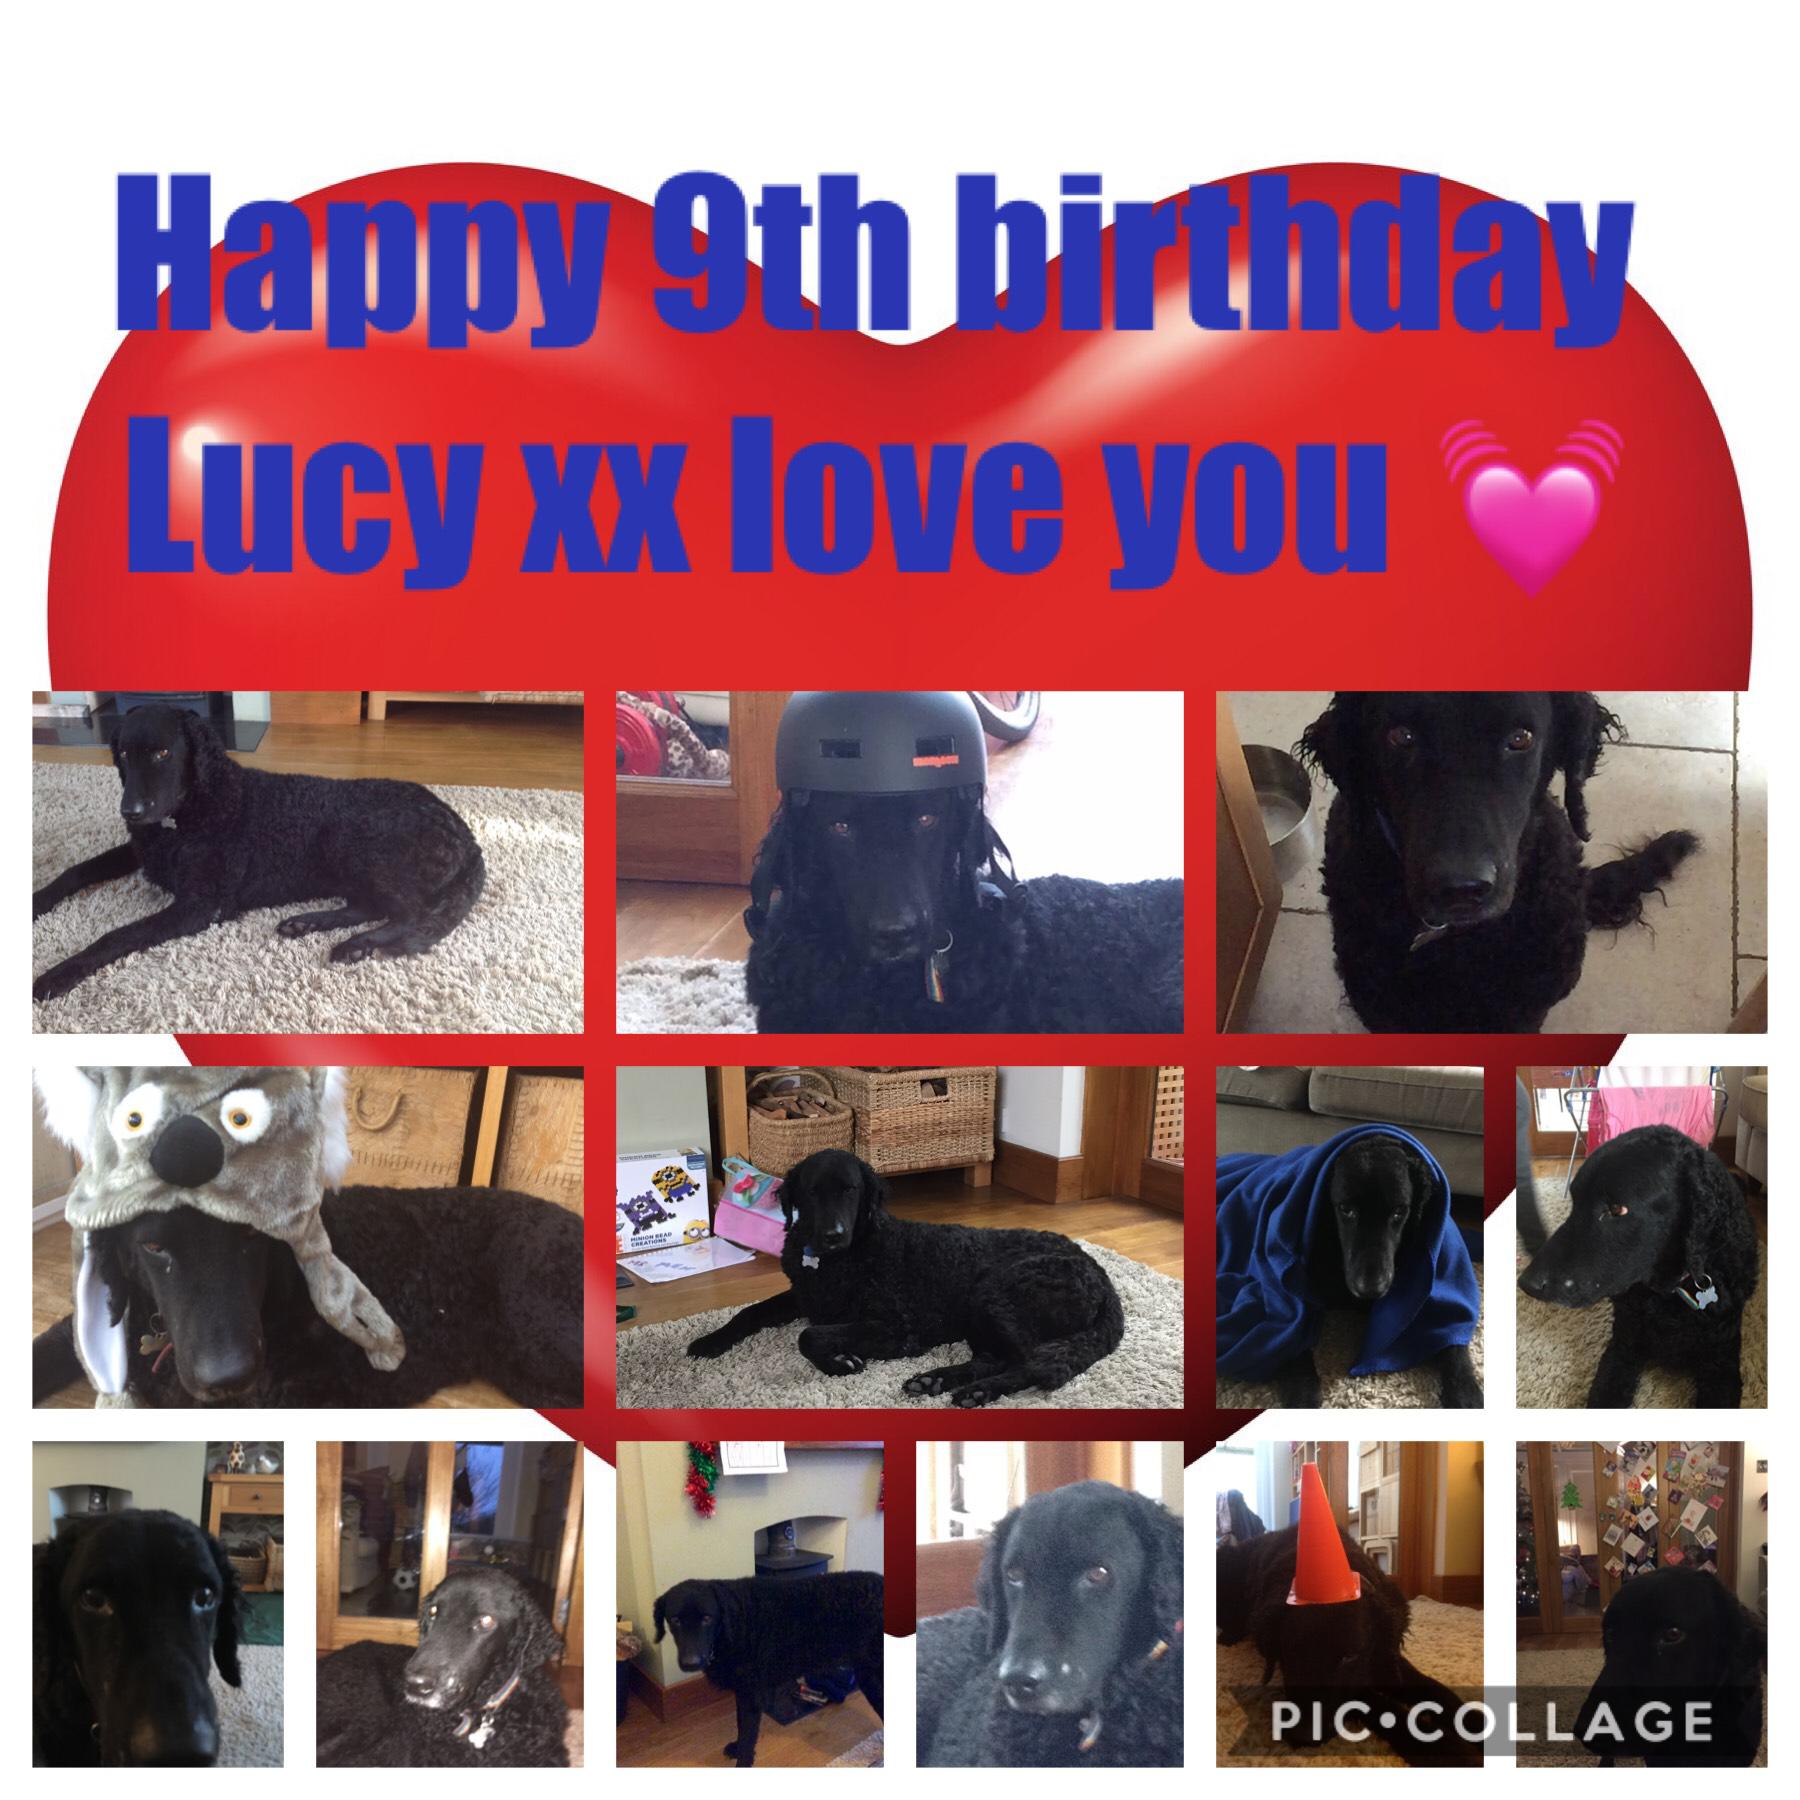 Love you Lucy, happy birthday 🎁 